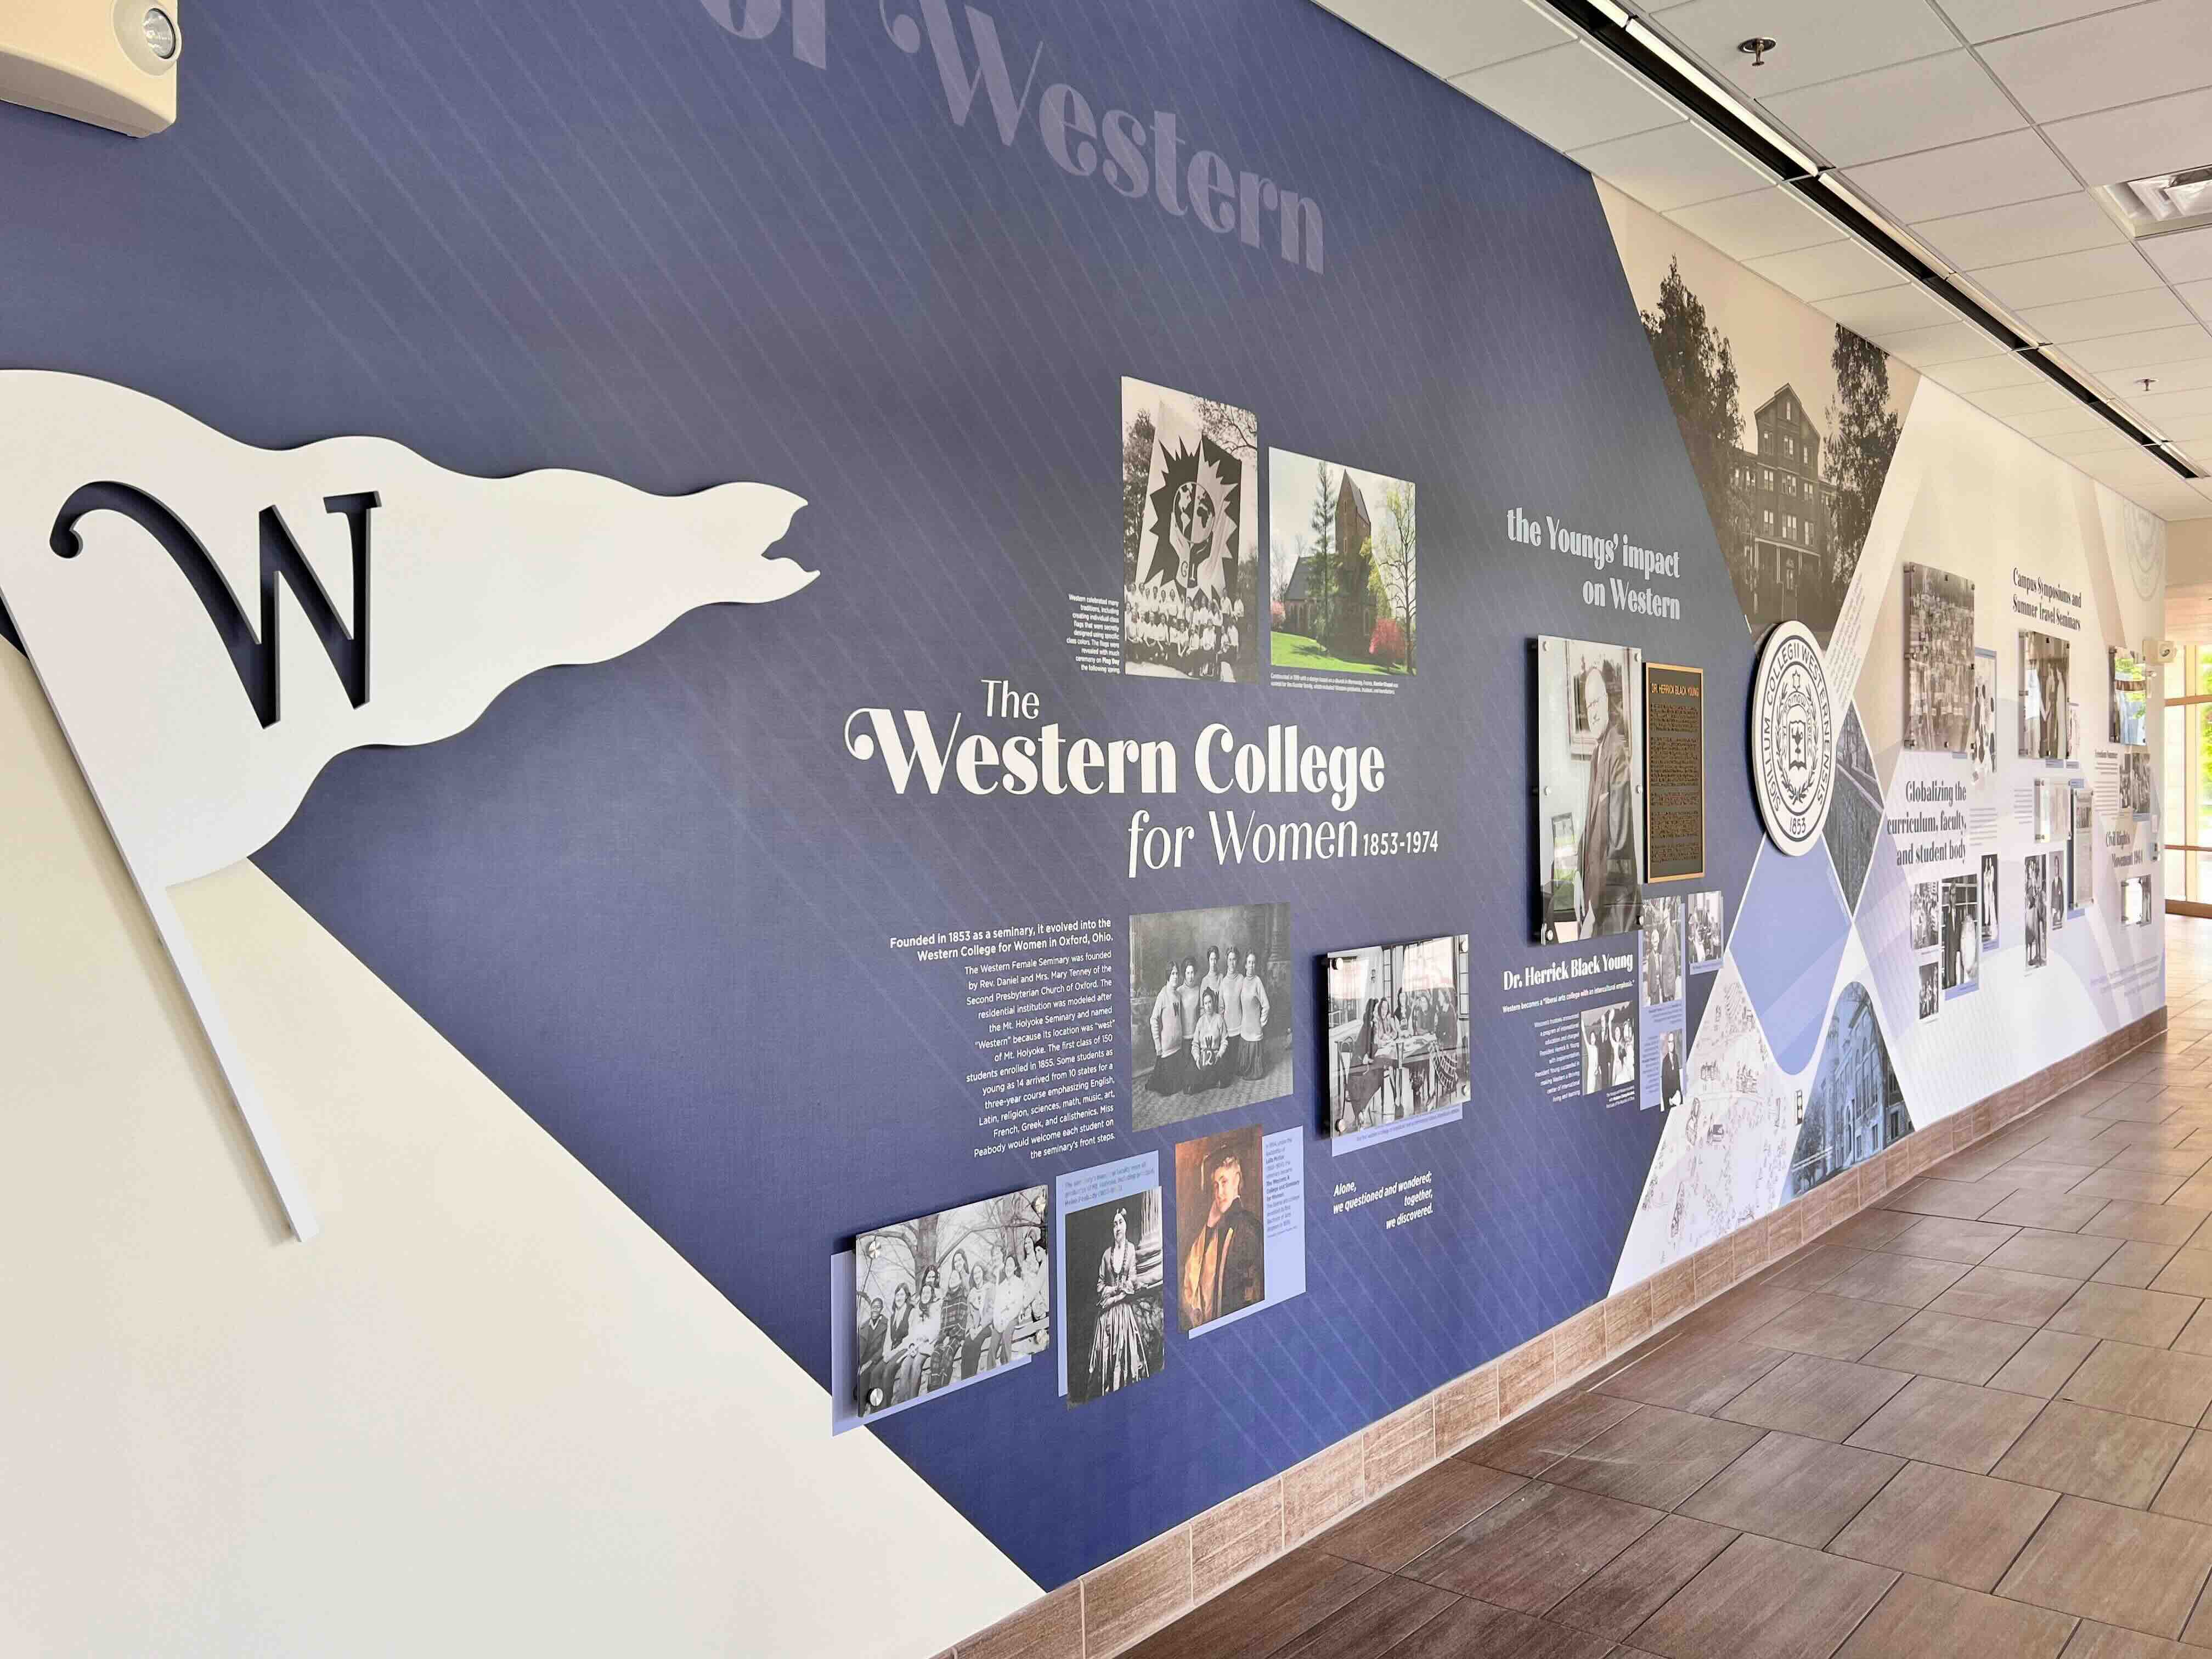 Part of the wall that looks at the history of the Western College for Women